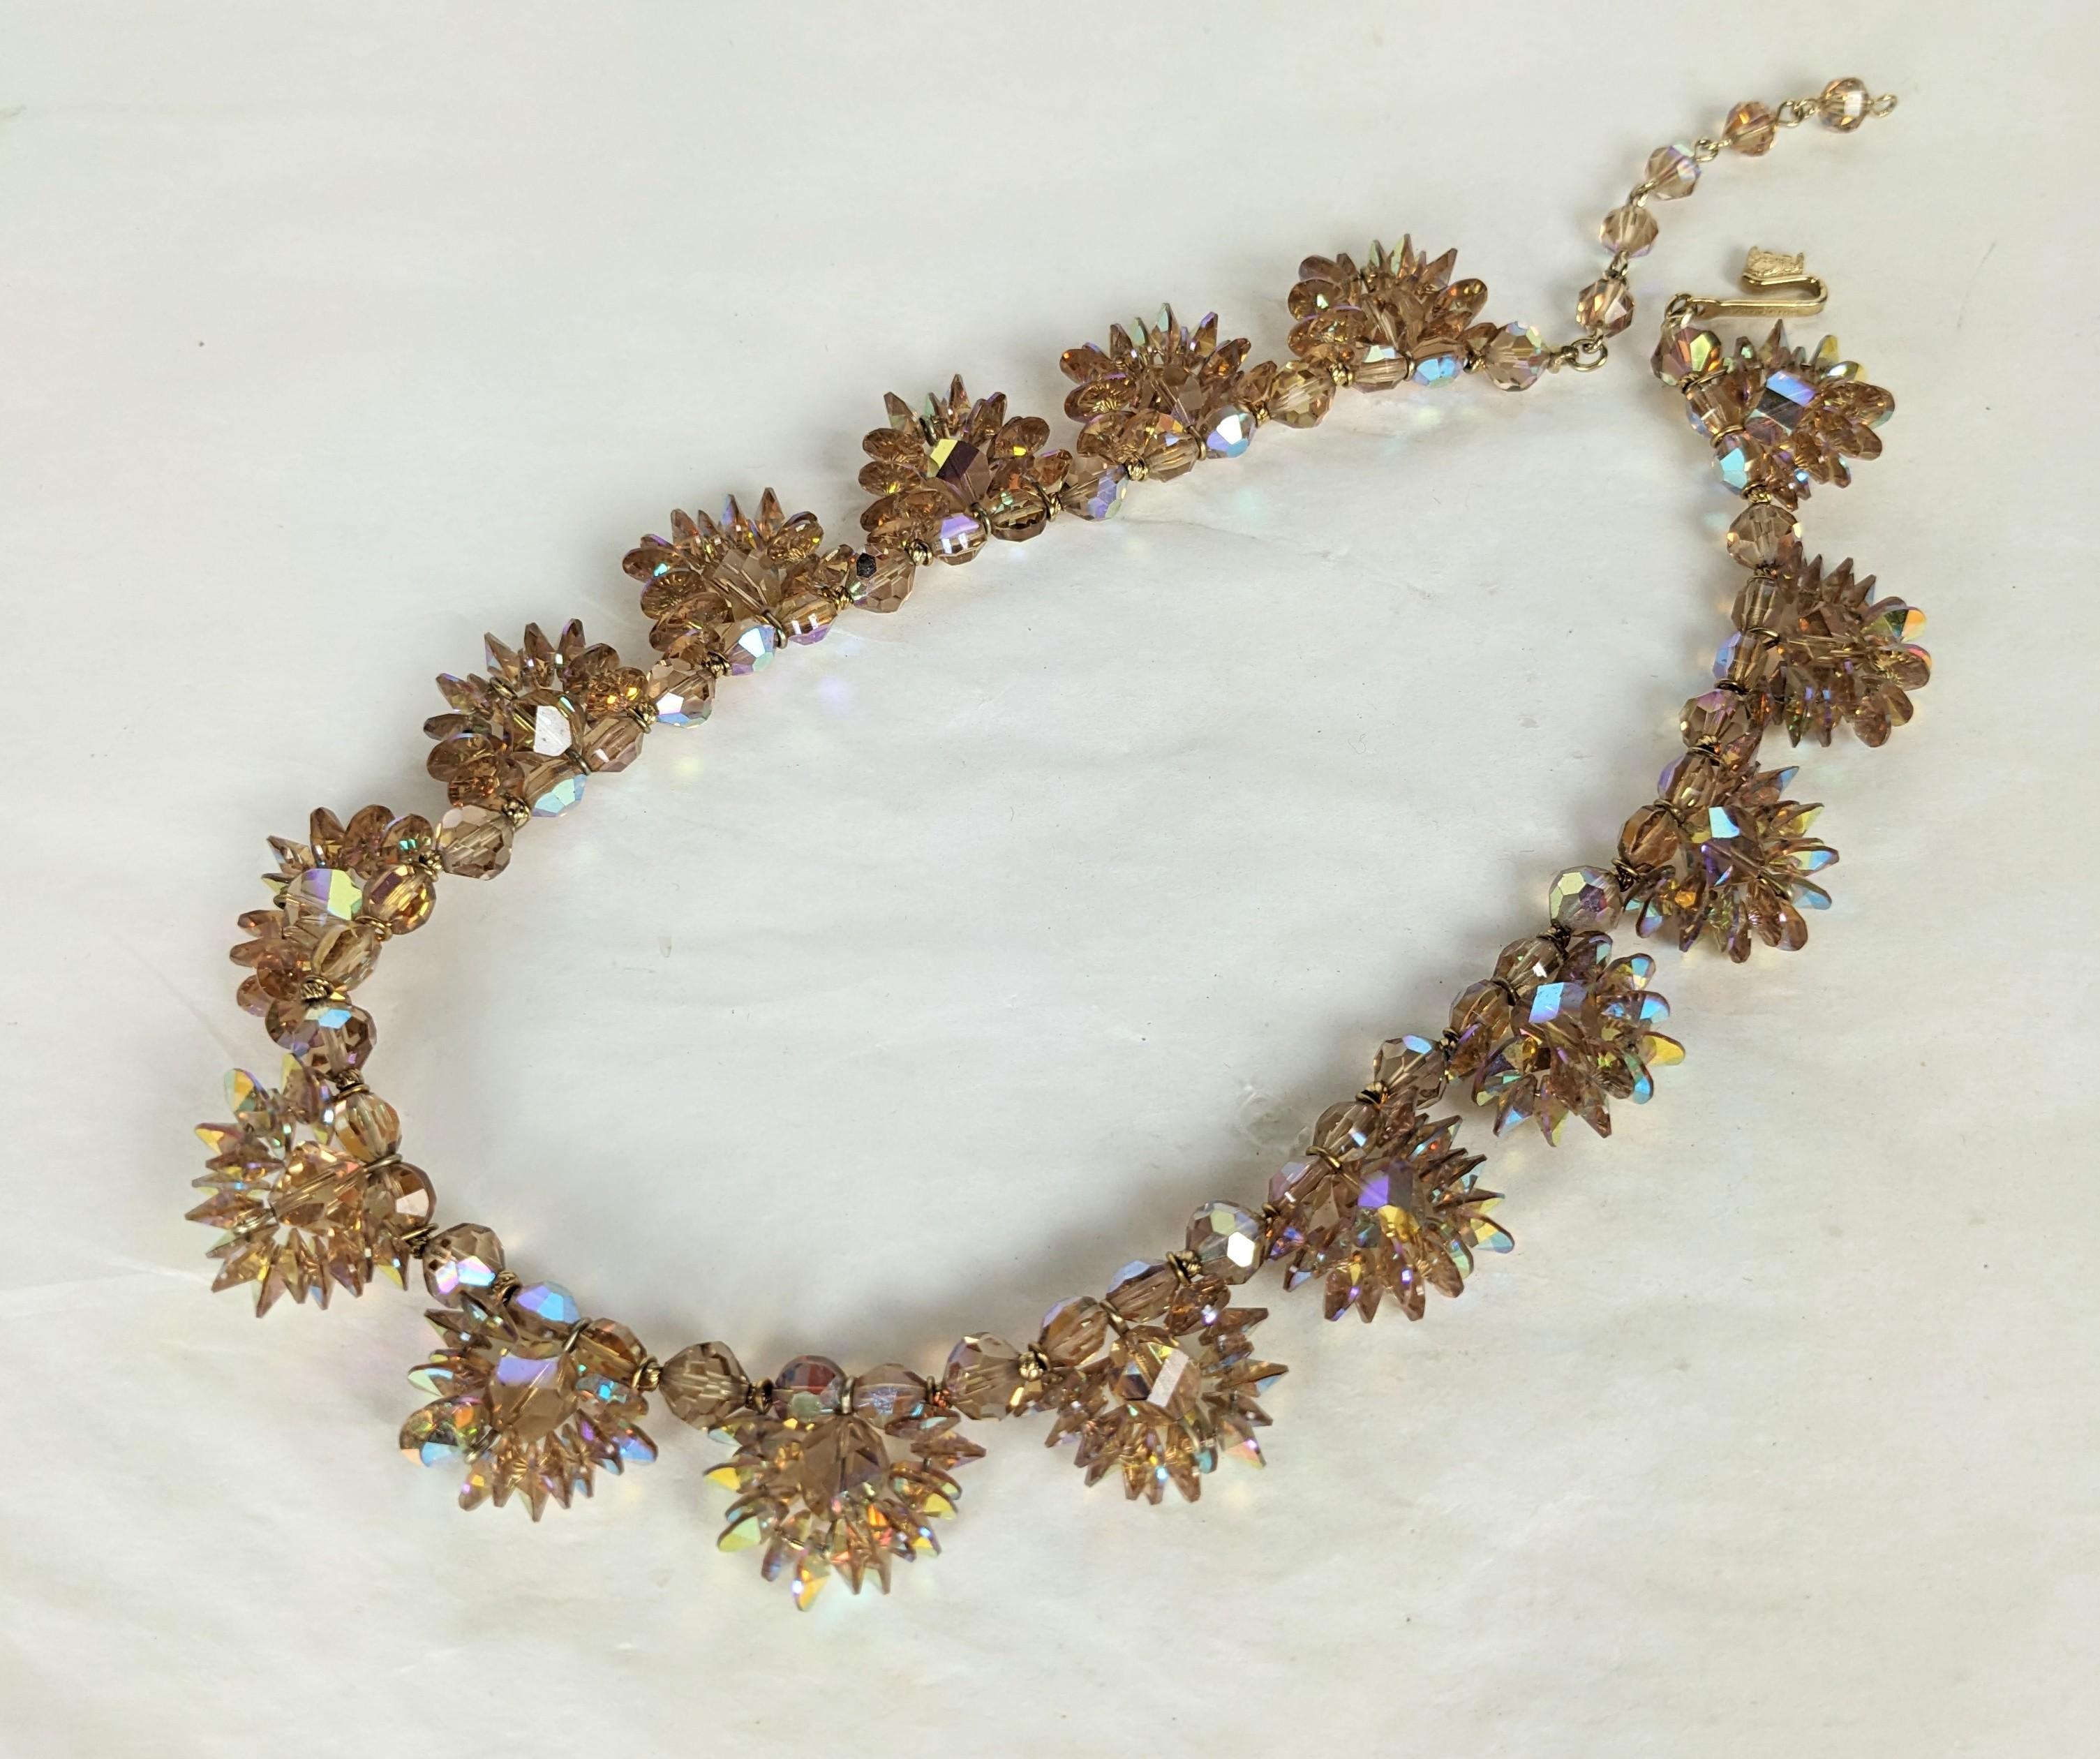 Vendome Aurora Crystal Beaded Necklace from the 1950's. Vari shaped faceted topaz aurora beads are hand beaded in scalloped form. Length 14